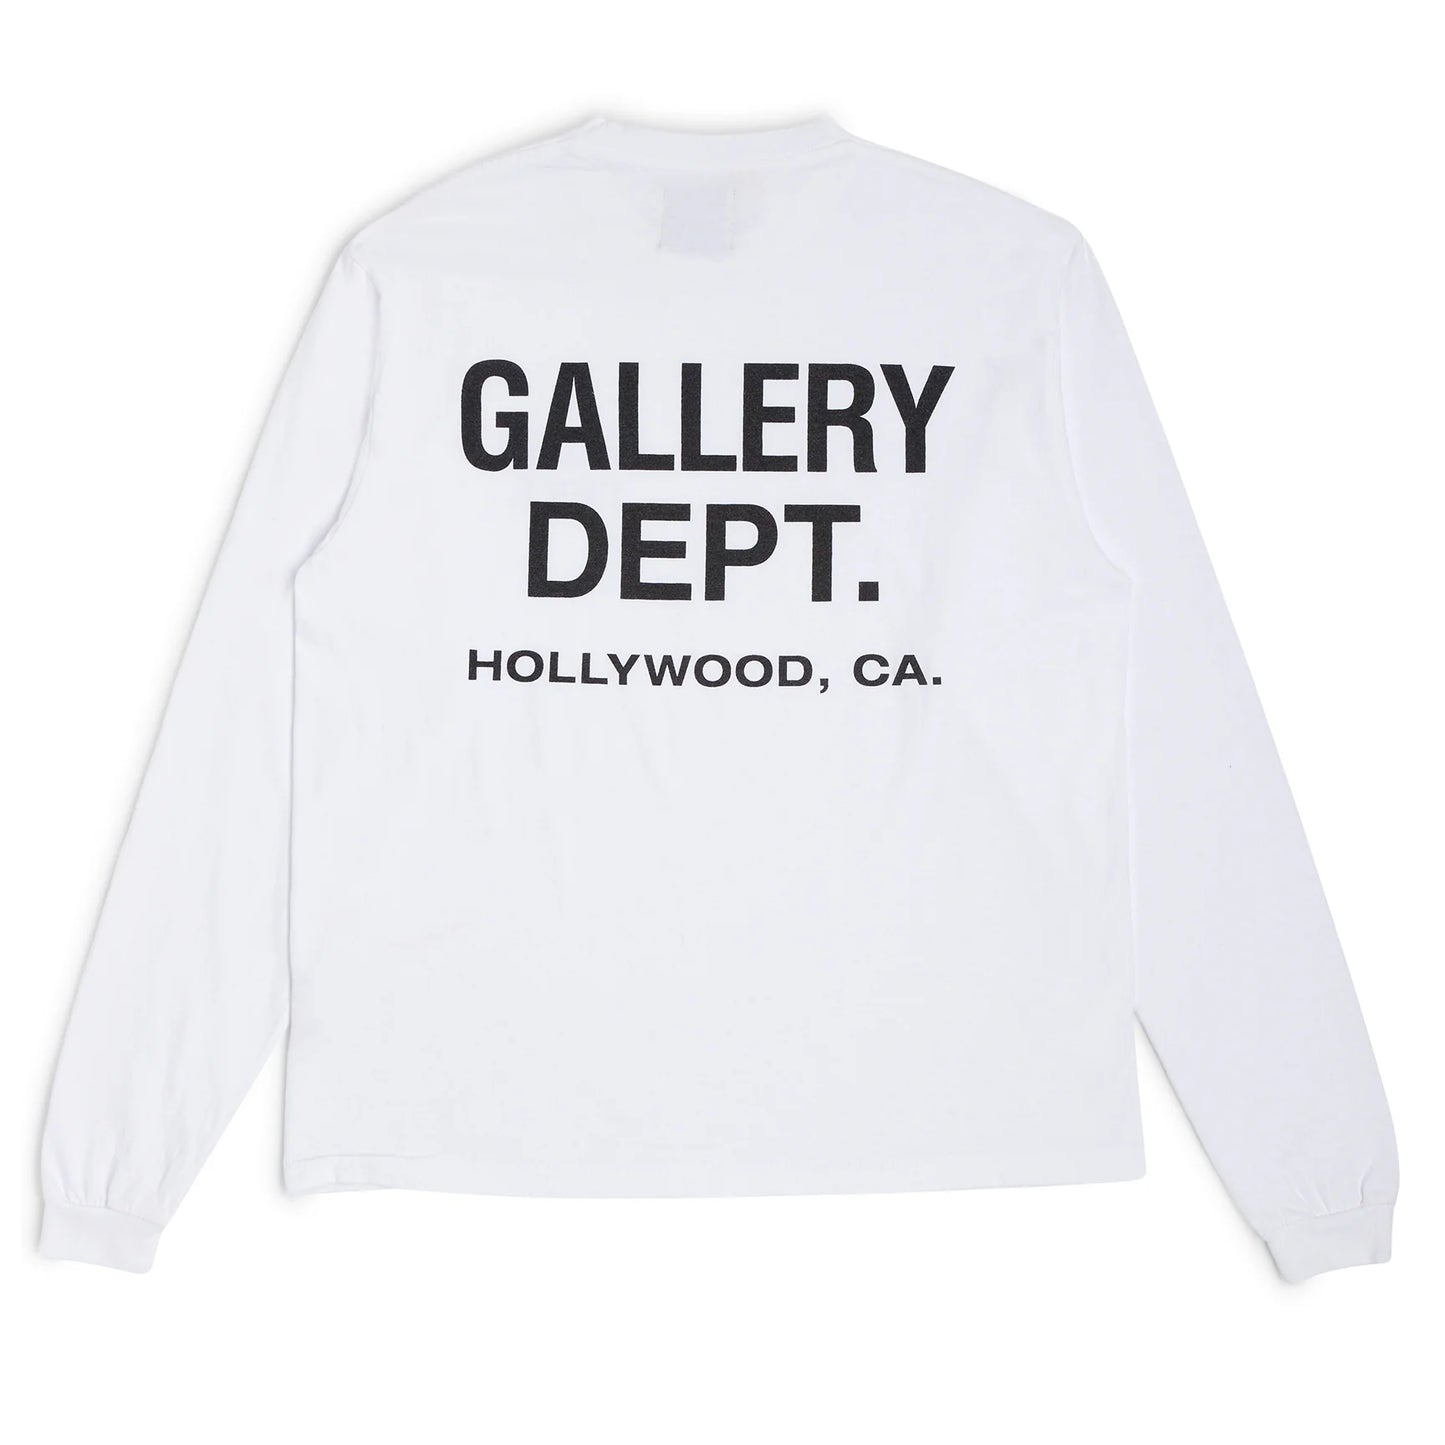 Gallery Dept. Souvenir L/S T-shirt White from GALLERY DEPT.